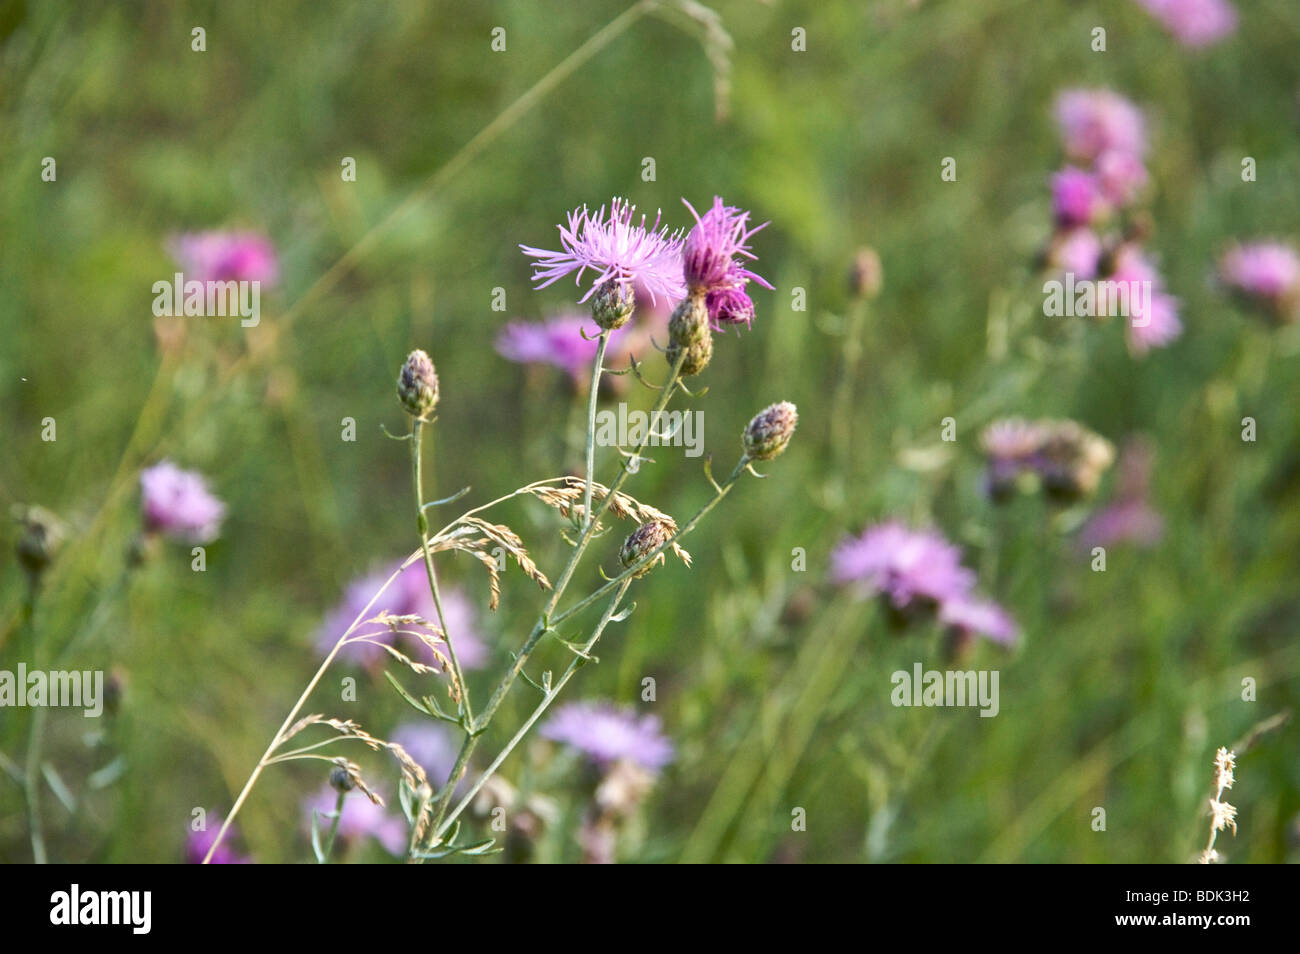 Spotted knapweed. Montana. Invasive weed native to eastern Europe. Stock Photo